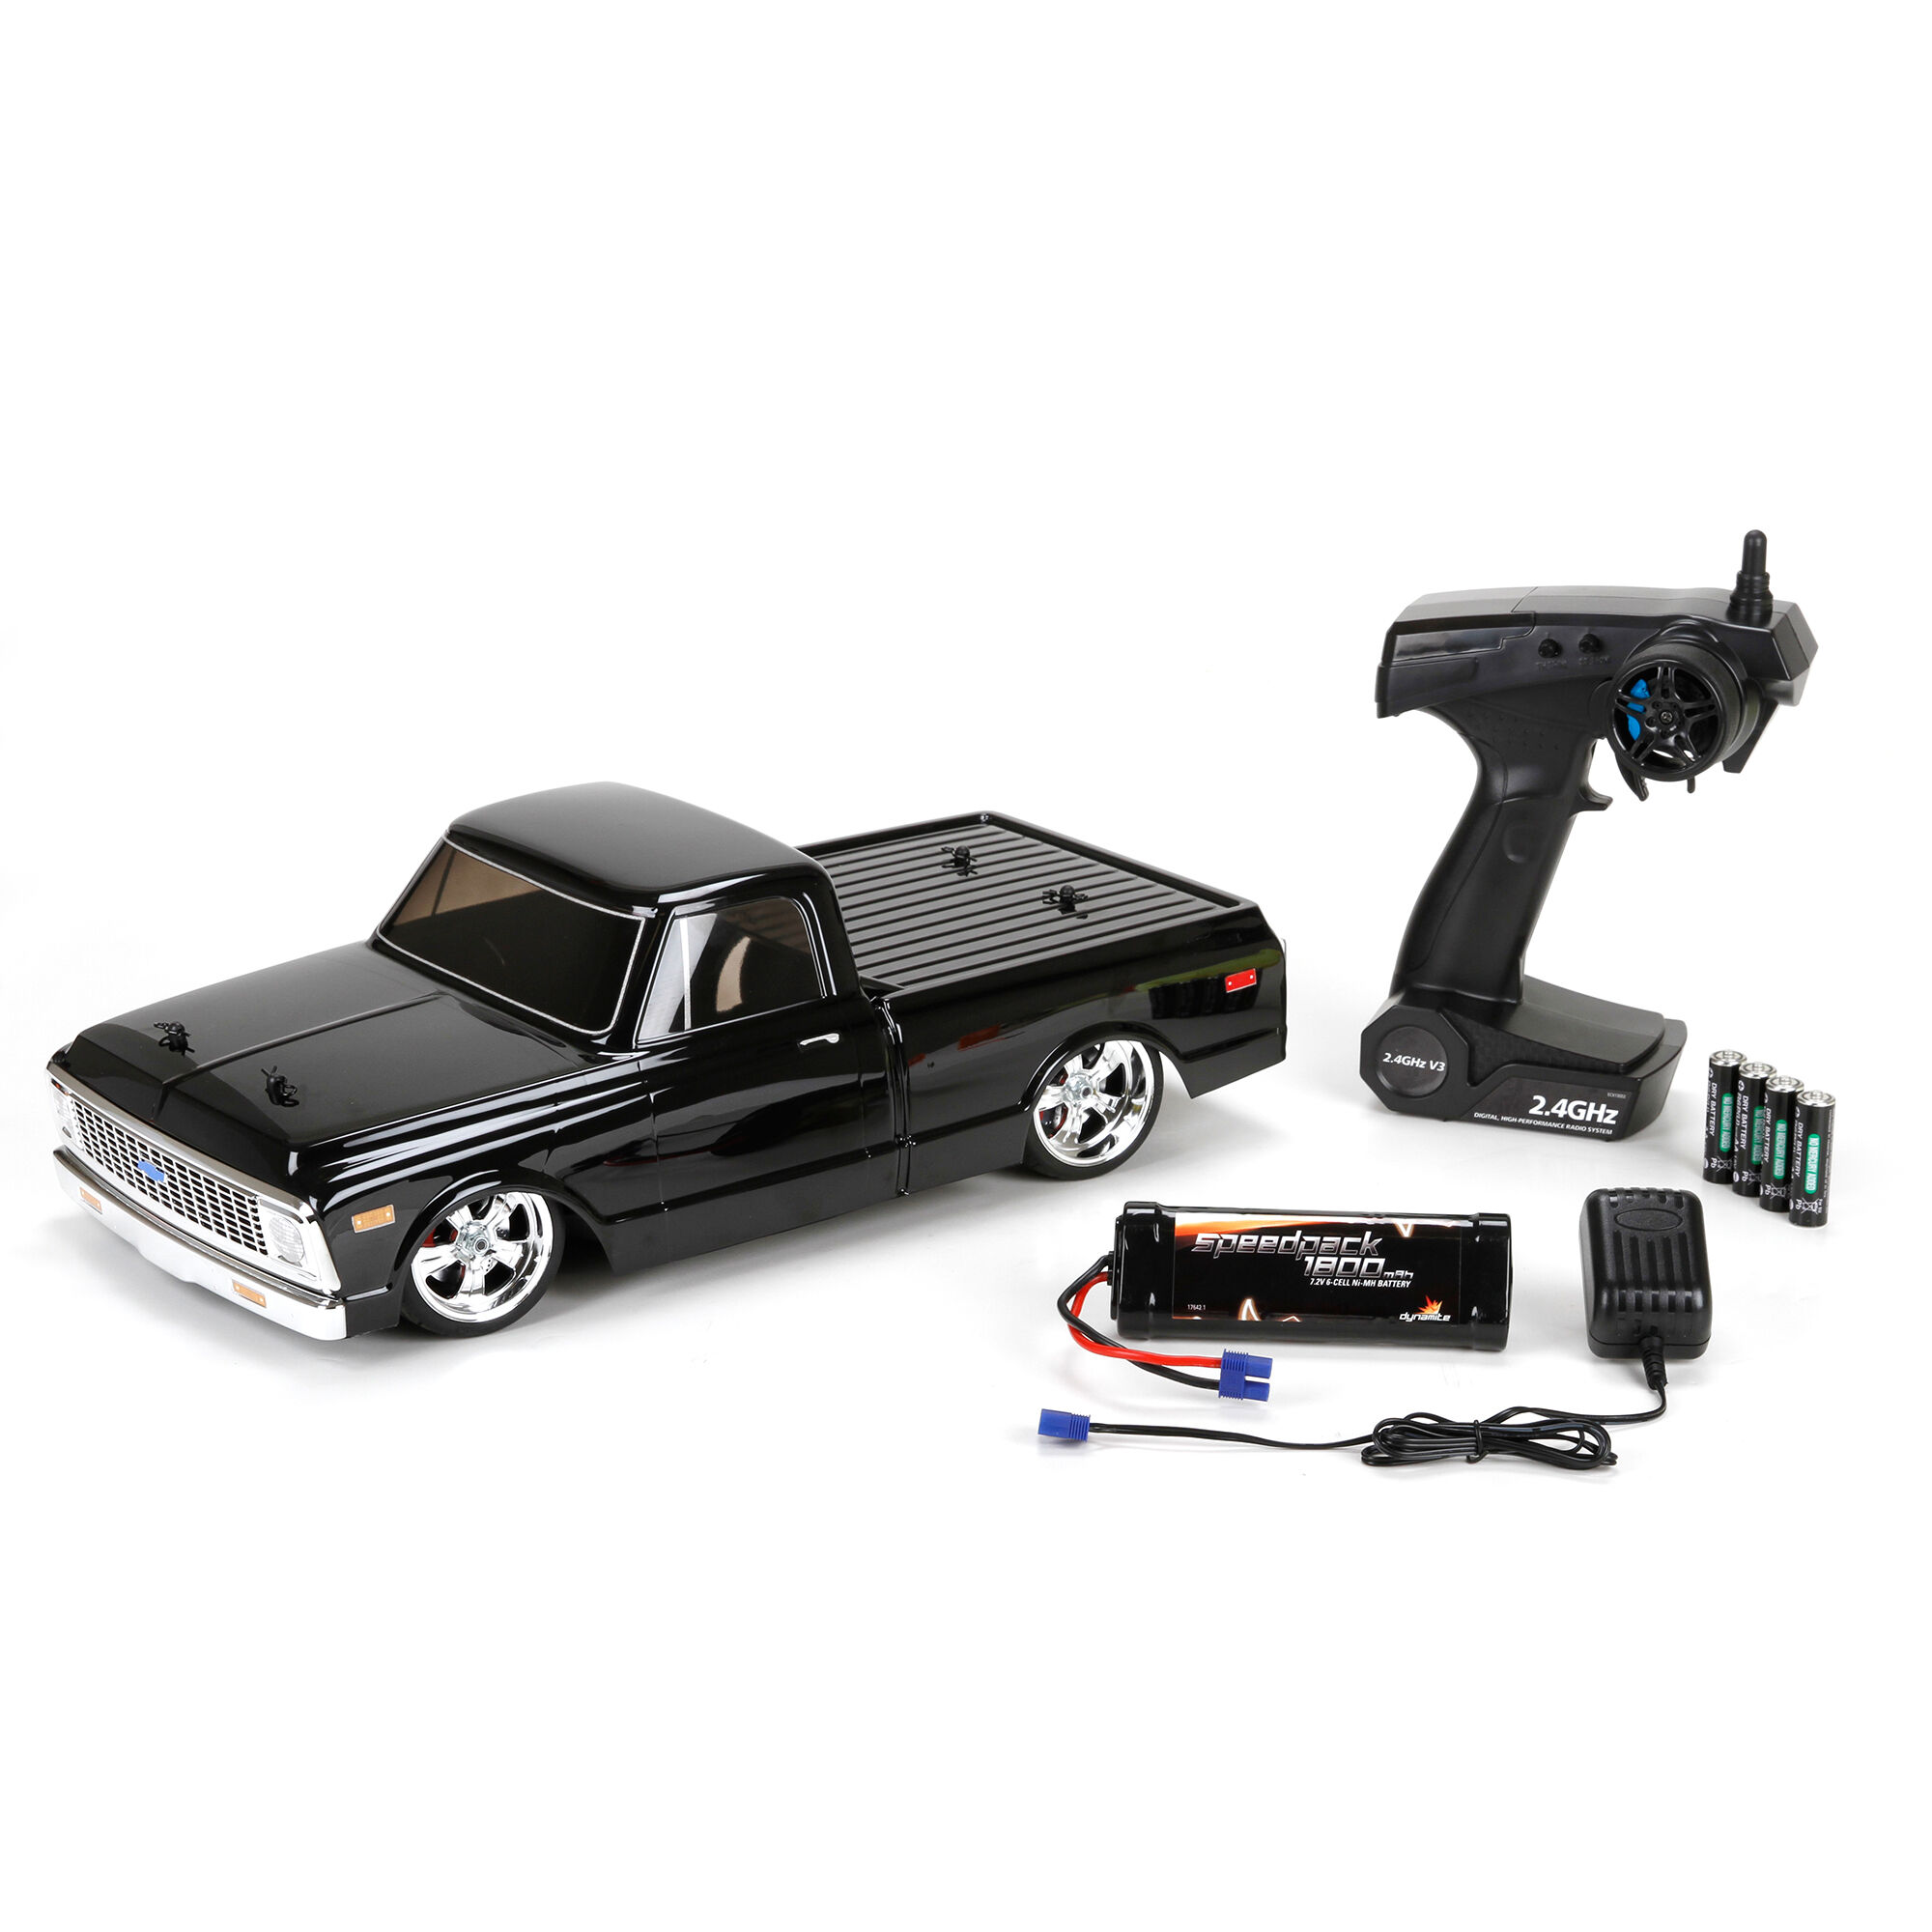 Vaterra 1/10 1972 Chevy C10 Pickup Truck V-100 S 4WD Brushed RTR 